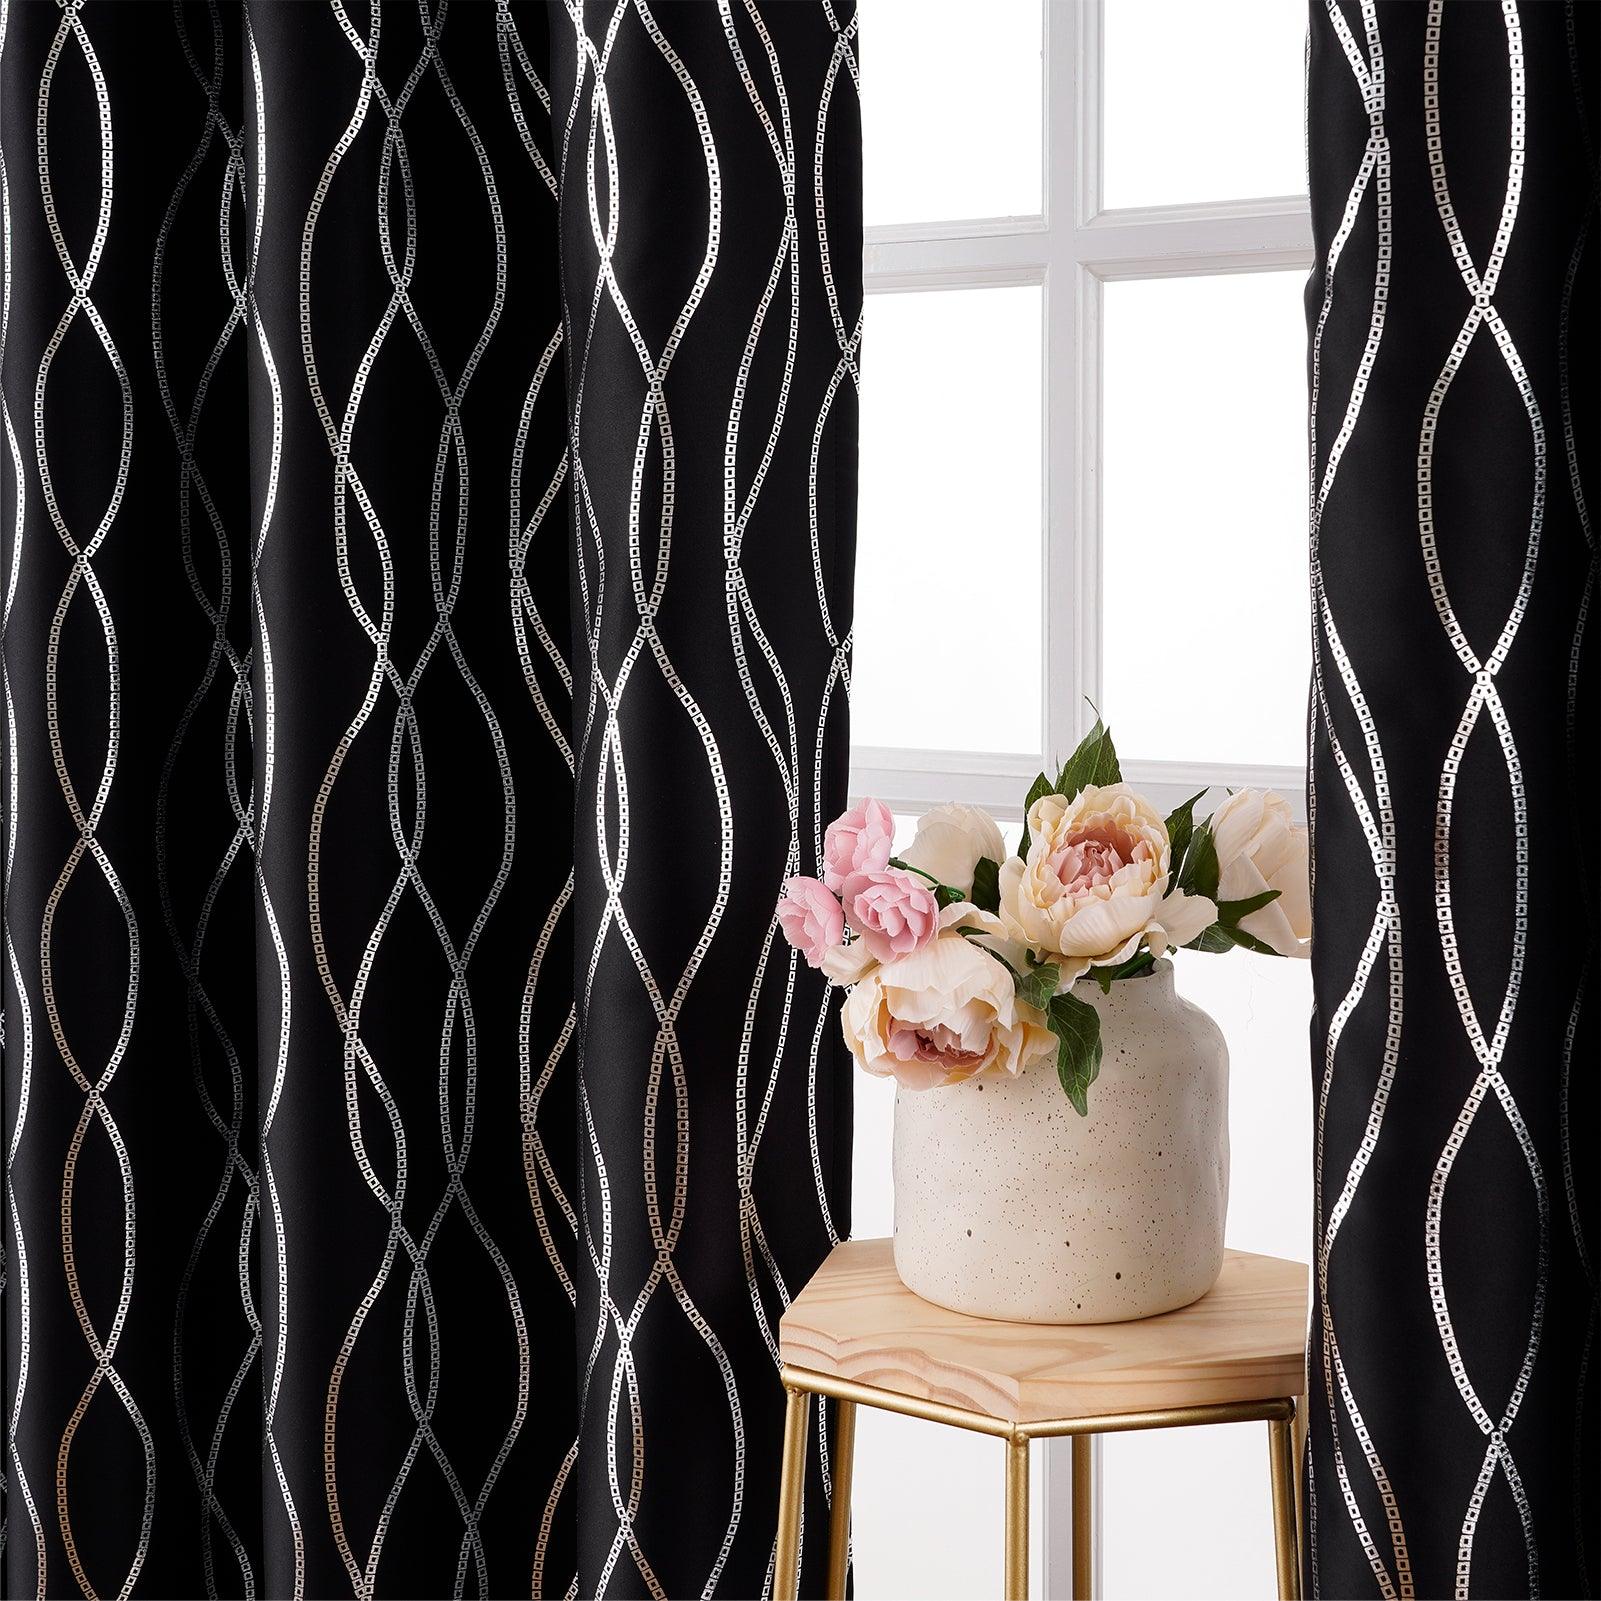 Custom-Made Blackout Curtains -Pongee Printed Thermal Insulating Drapes For House Bedroom,100% Blackout,1 Panel - Topfinel